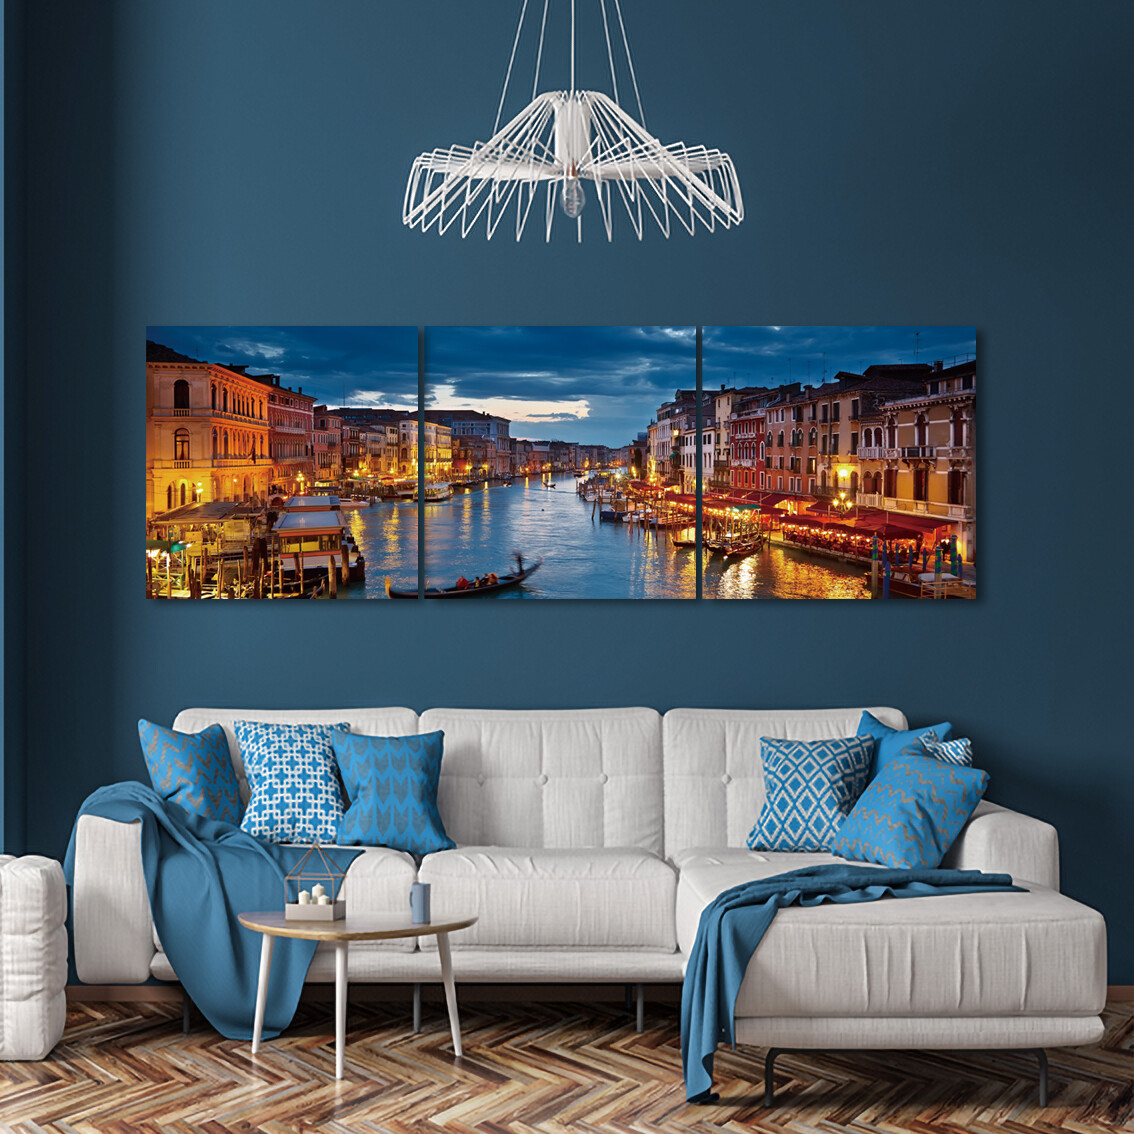 Venice Glowing at Dusk - Modern Luxury Wall art Printed on Acrylic Glass - Frameless and Ready to Hang